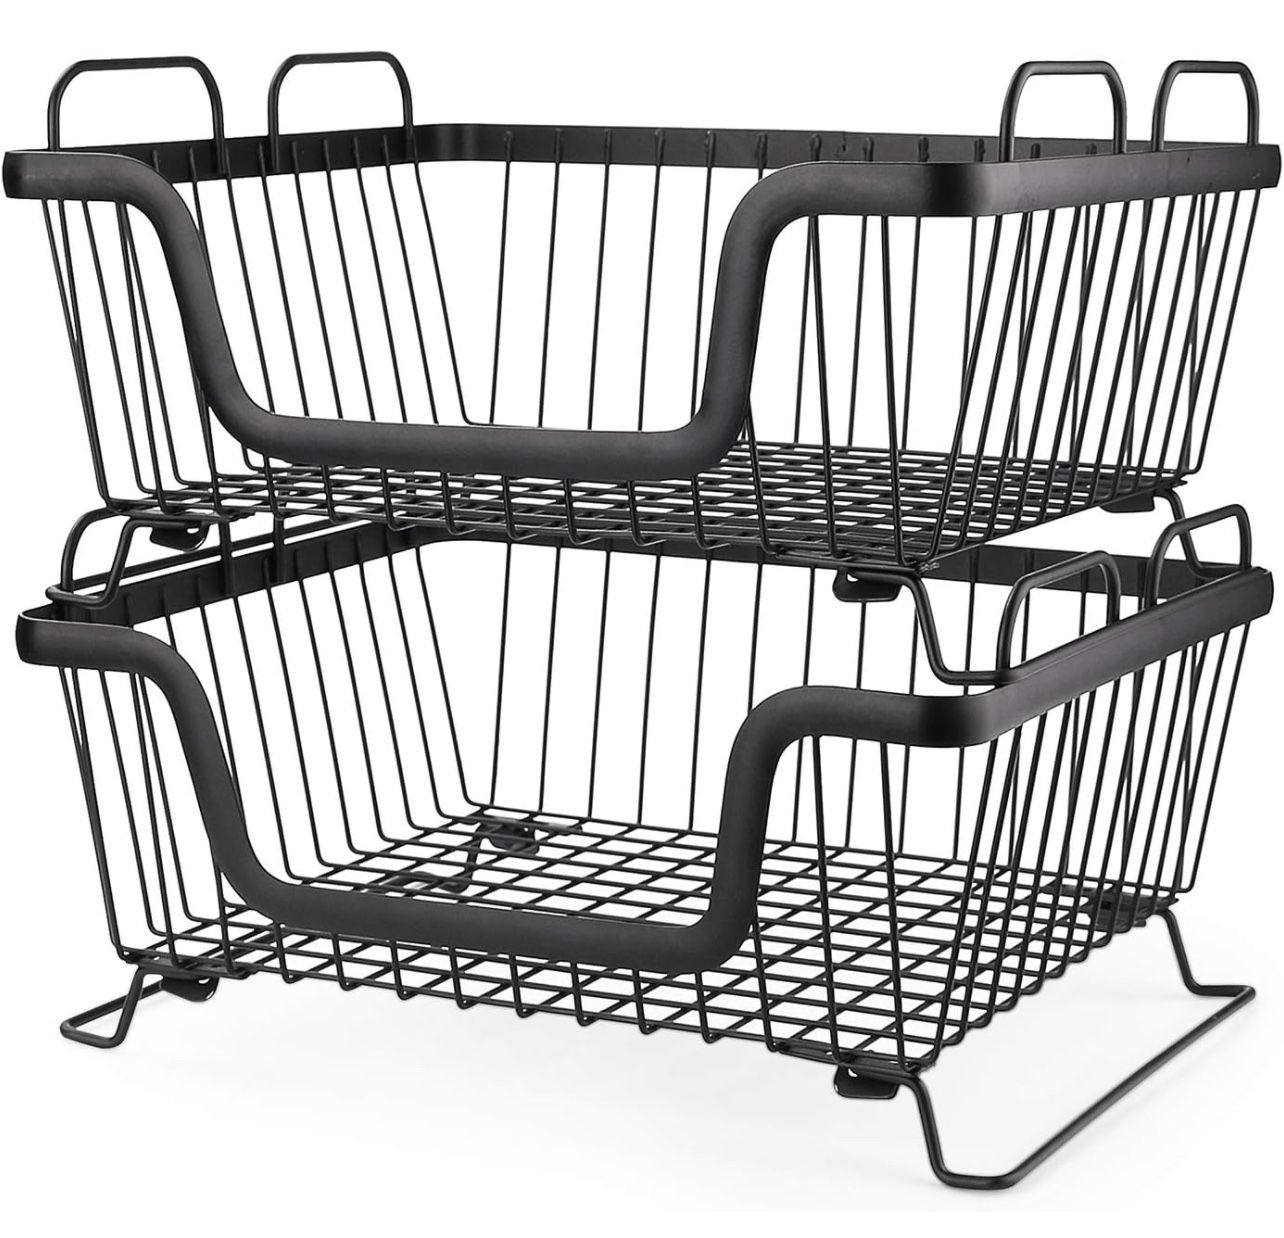 Stackable wire basket Large Metal Basket Wire Basket with Handles 2 Pack